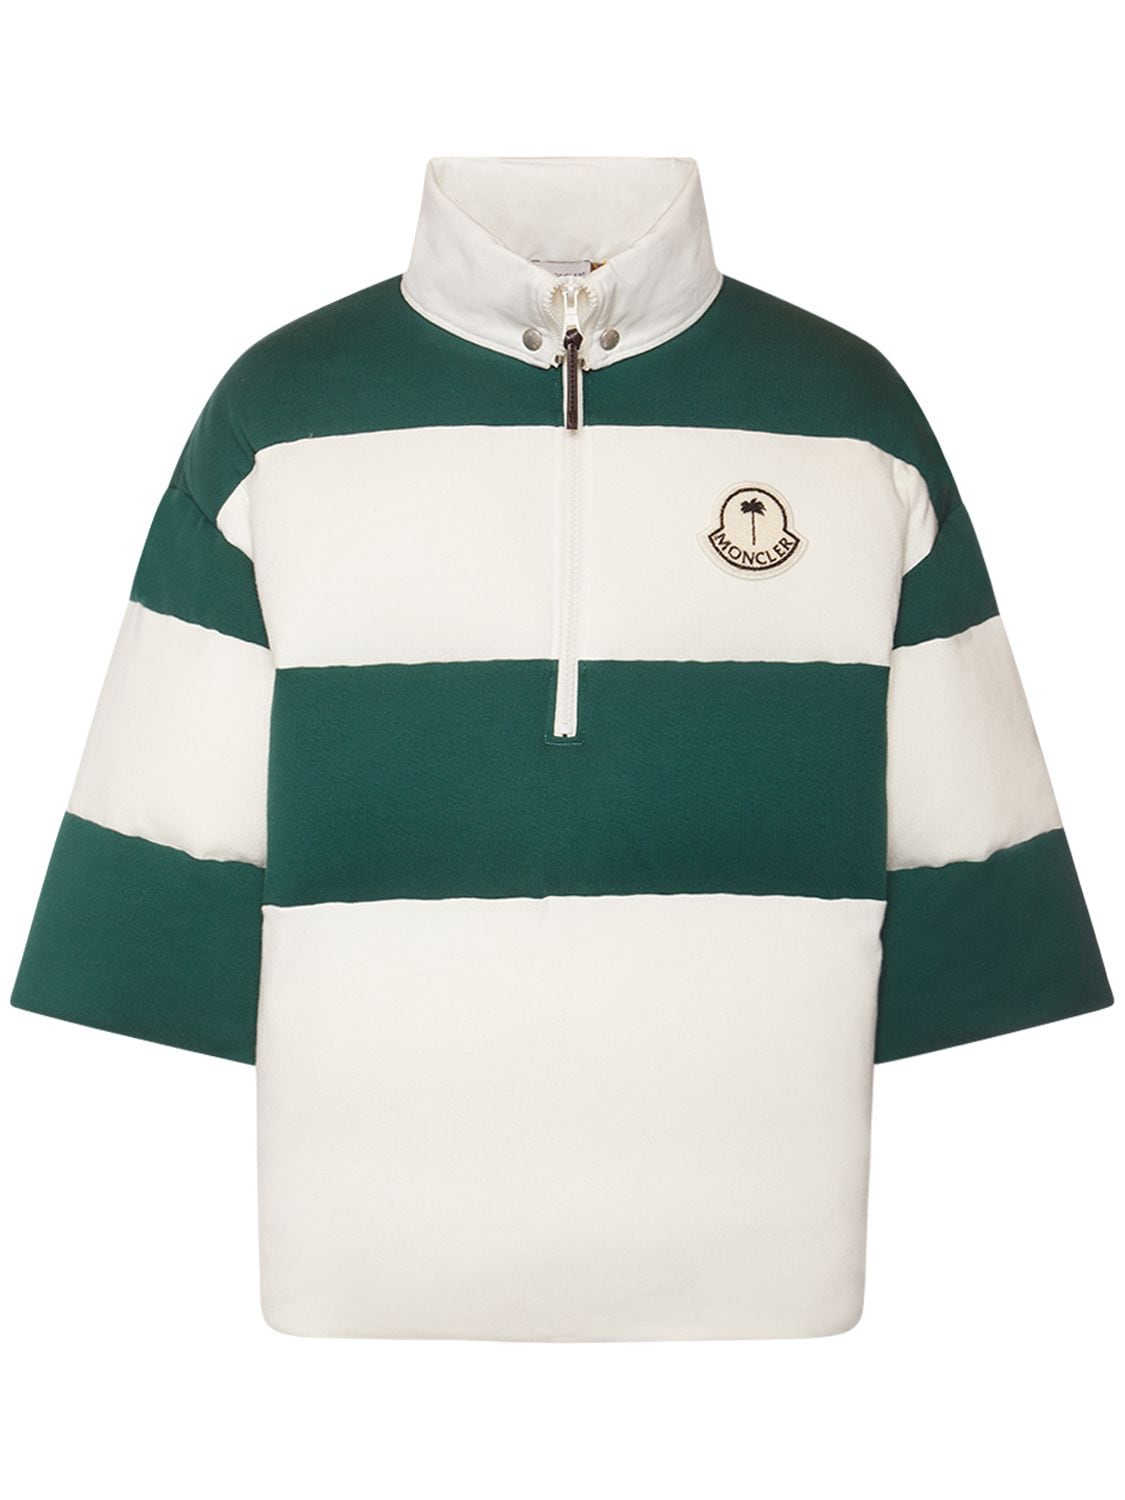 Moncler Genius Moncler X Palm Angels平纹针织羽绒服 In Green,white